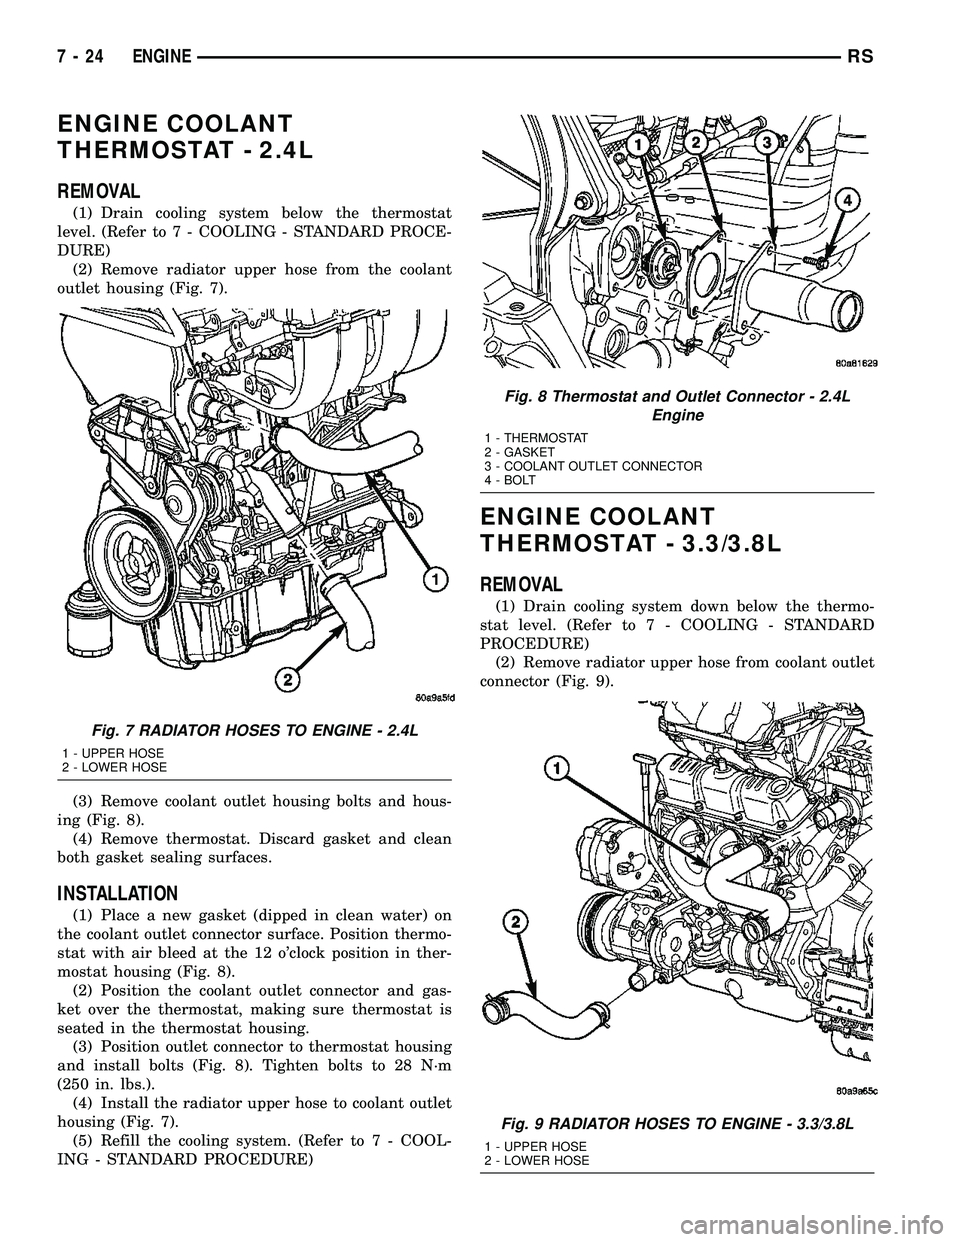 CHRYSLER VOYAGER 2005  Service Manual ENGINE COOLANT
THERMOSTAT - 2.4L
REMOVAL
(1) Drain cooling system below the thermostat
level. (Refer to 7 - COOLING - STANDARD PROCE-
DURE)
(2) Remove radiator upper hose from the coolant
outlet housi